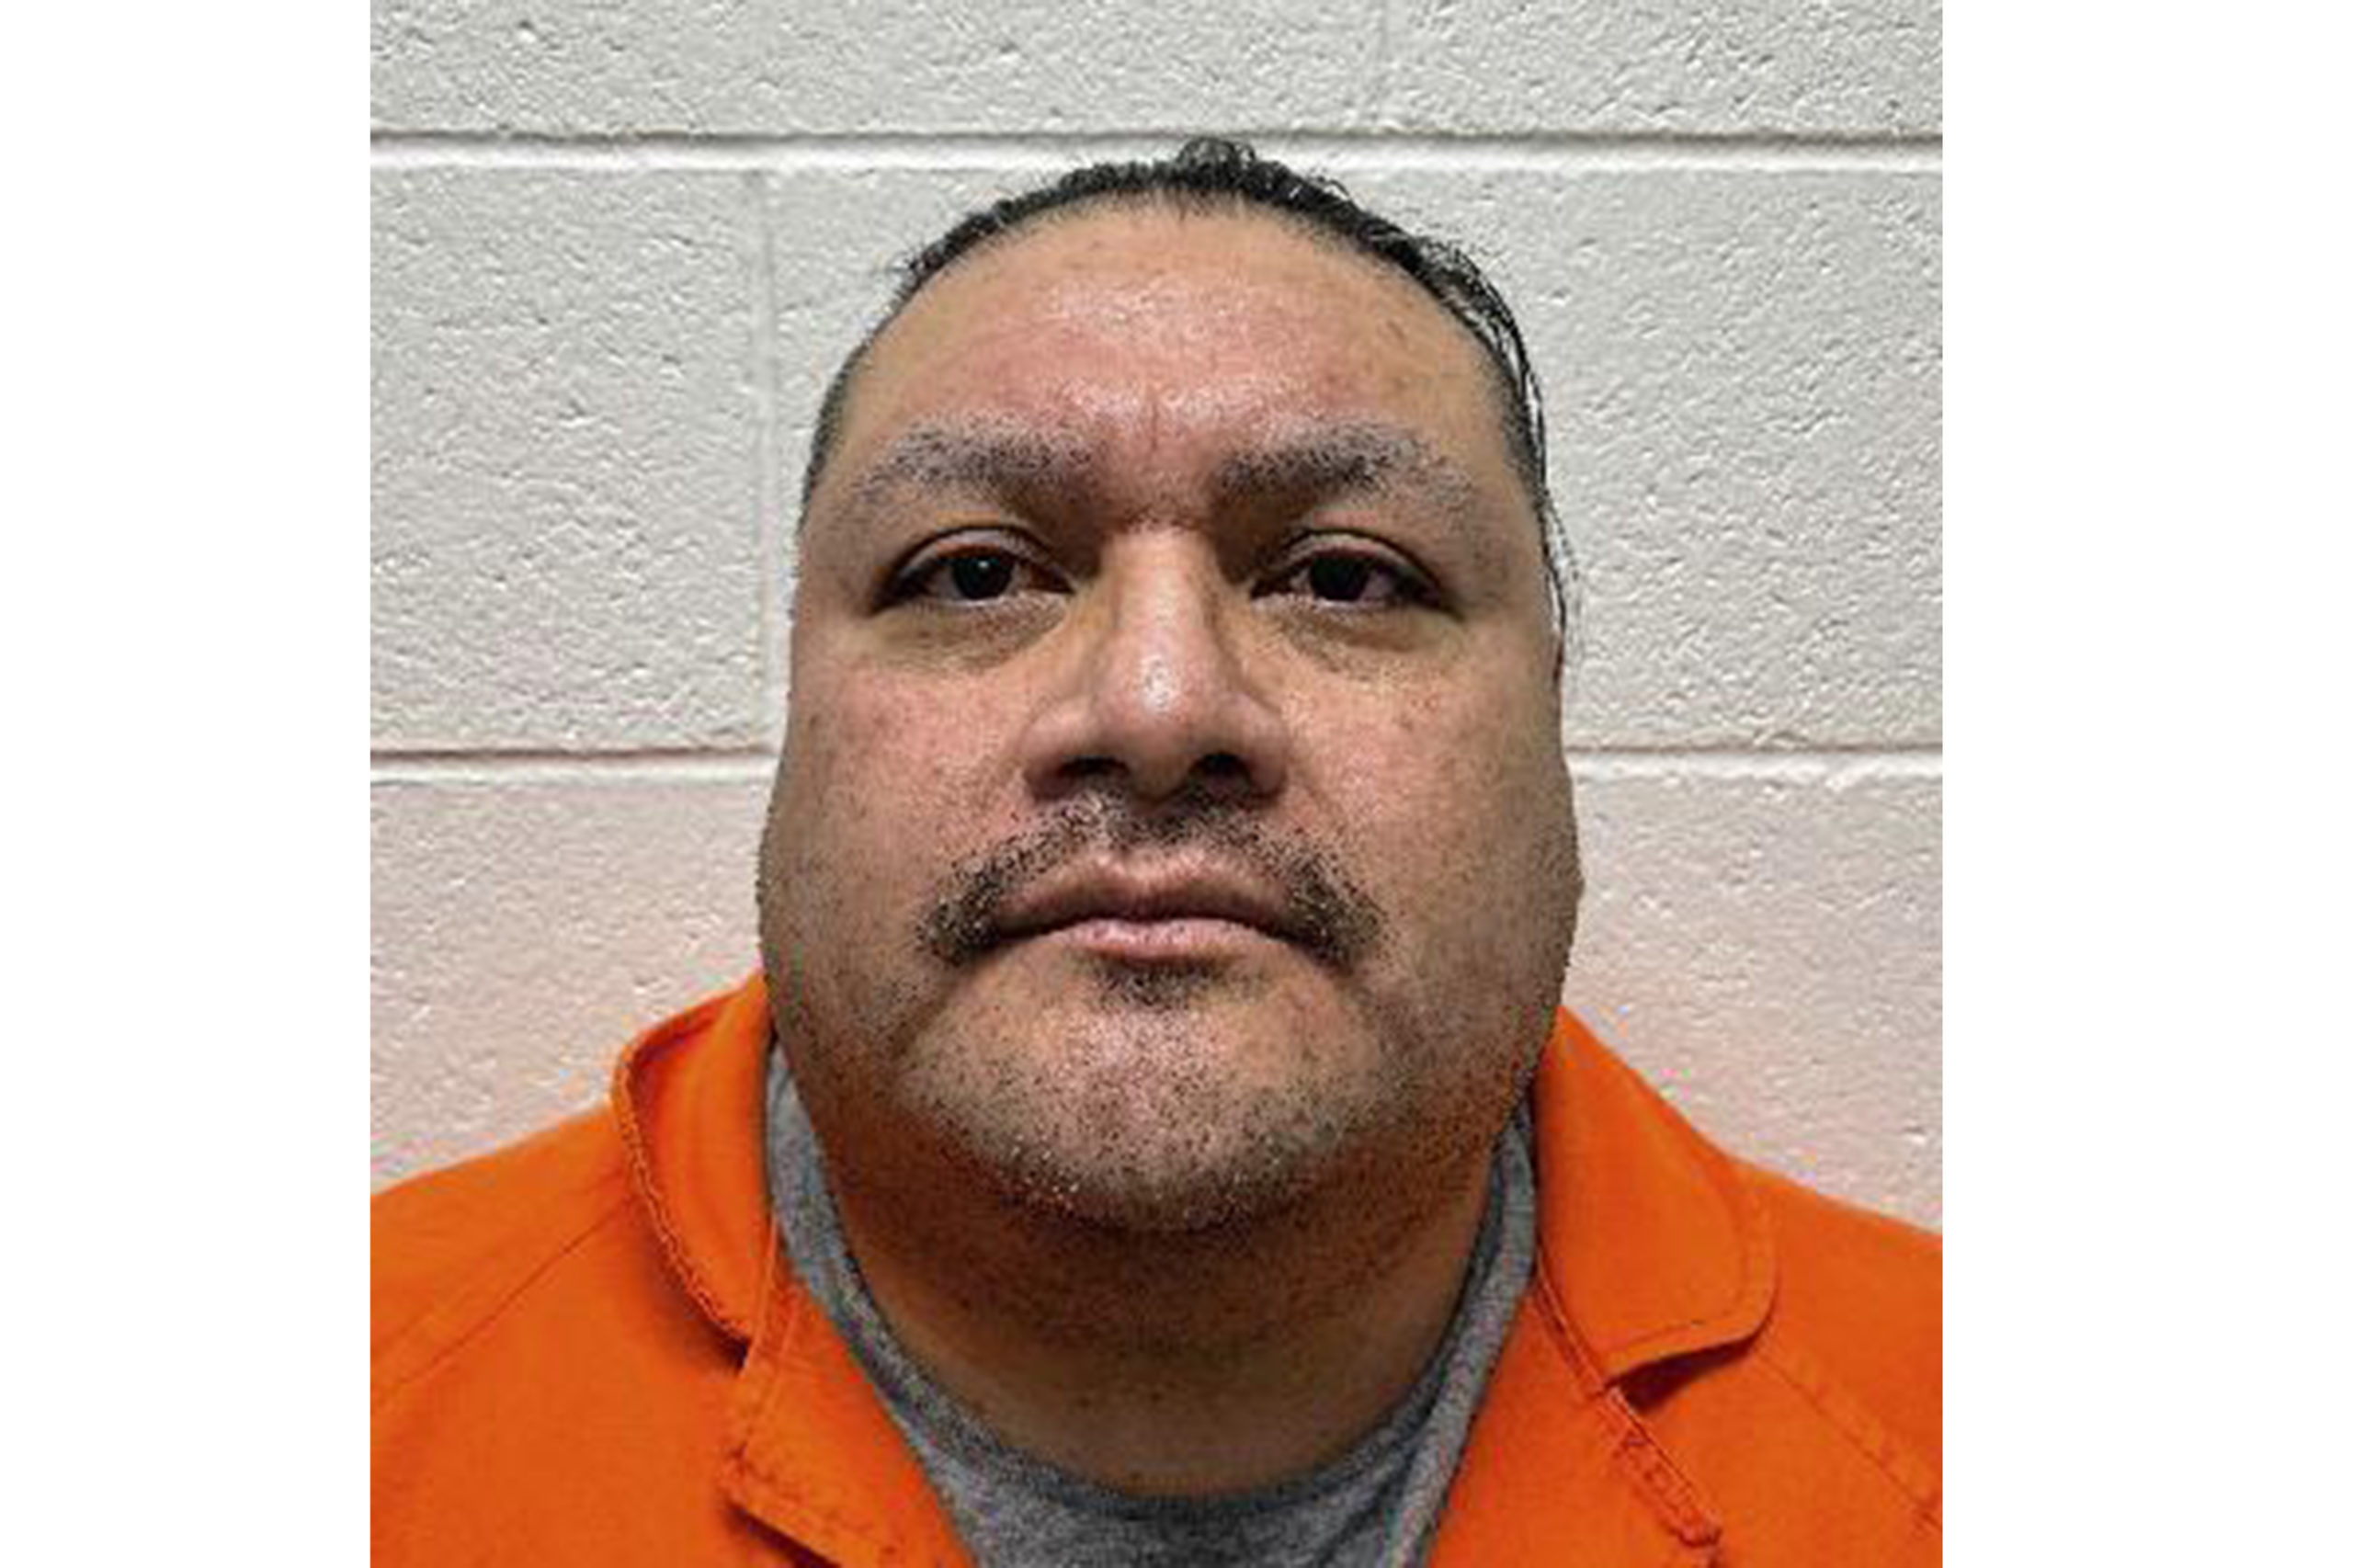 Death row inmate Taberon Dave Honie was convicted of aggravated murder in the brutal stabbing of his girlfriend's mother.